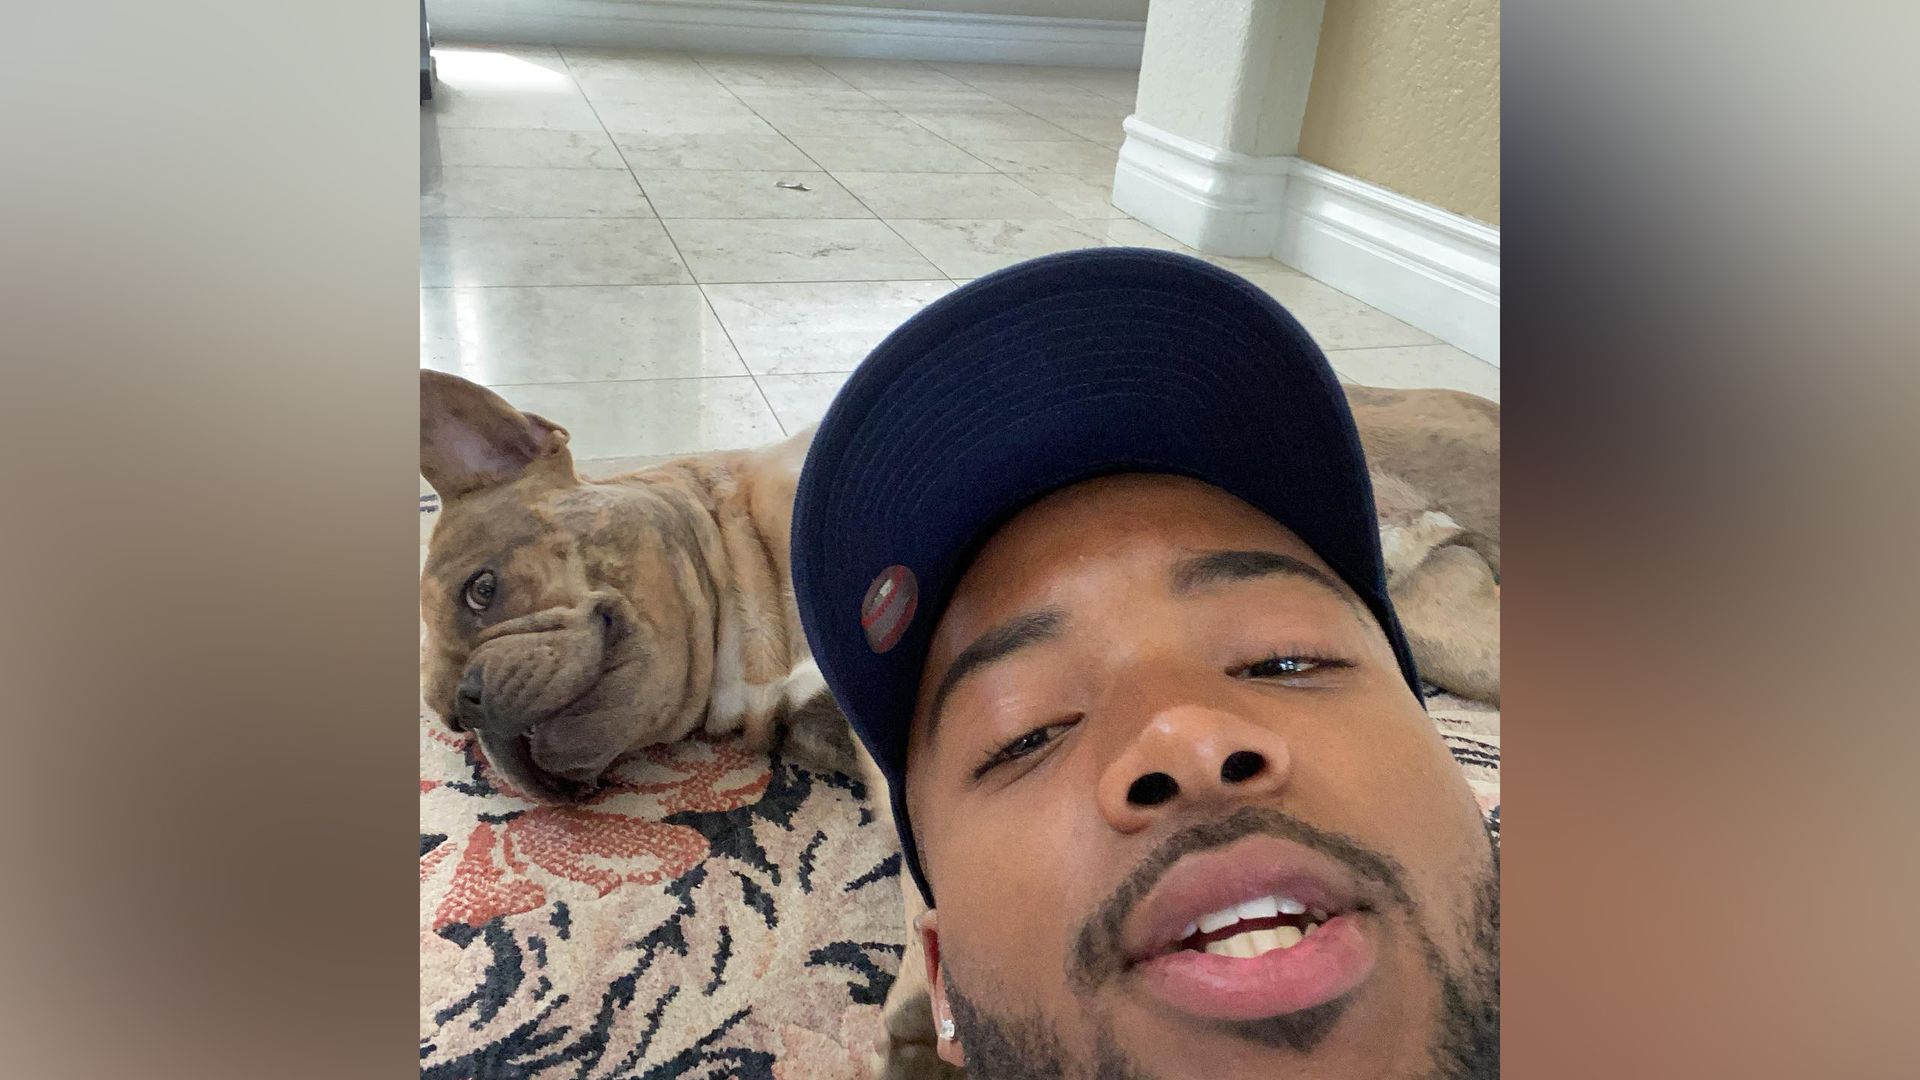 Algee Smith with his dog